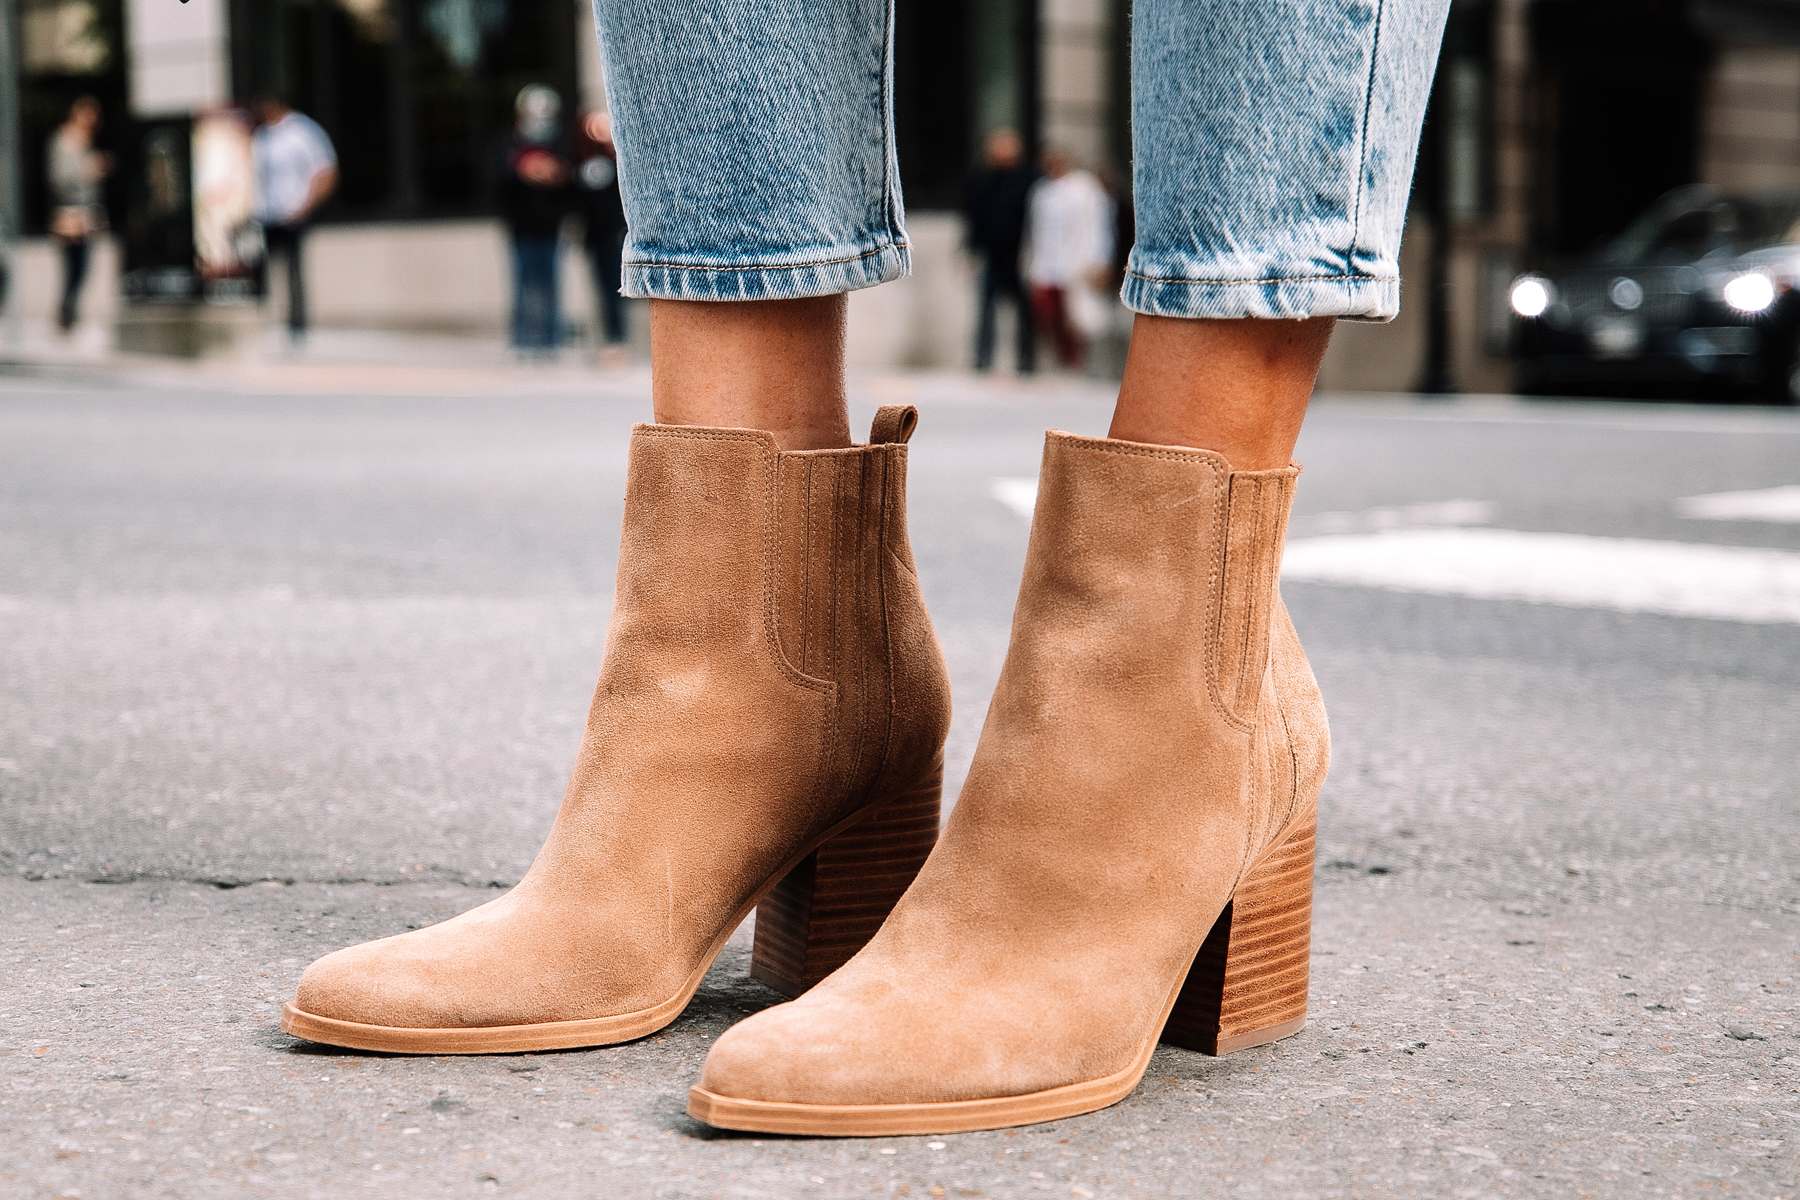 Fashion Jackson Wearing Marc Fisher Oshay Natural Suede Booties